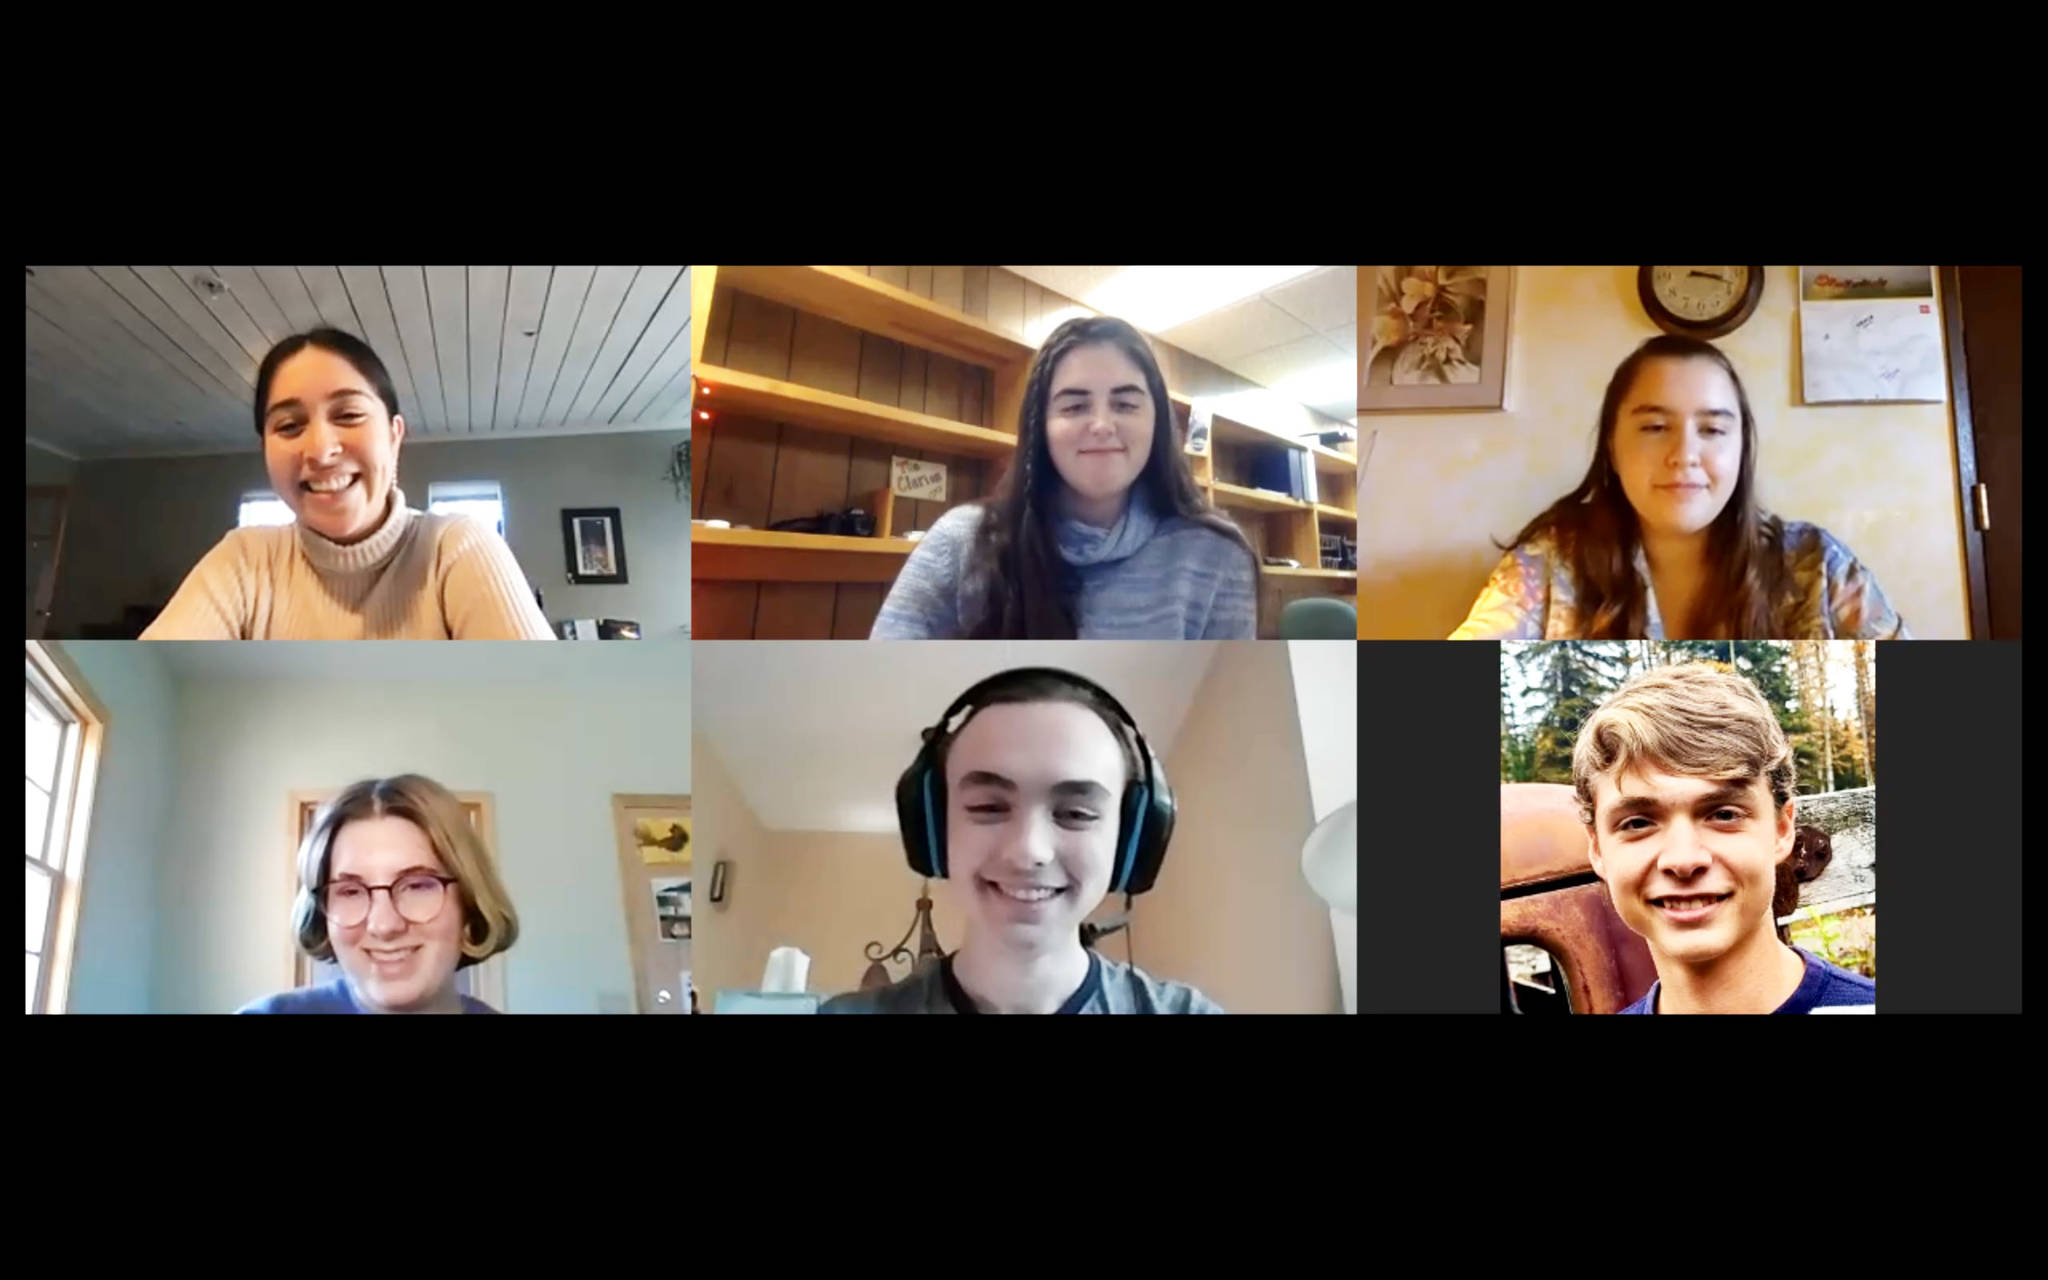 Participants in a roundtable discussion hosted via Zoom are seen in a screenshot from the interview, which was conducted on Friday, Oct. 30, 2020 from Kenai, Alaska. Clockwise from top left: Selma Casagranda, Ashlyn O’Hara, Tegan Retzer, Quinn Cox, Kaegan Koski and Olivia Davis.